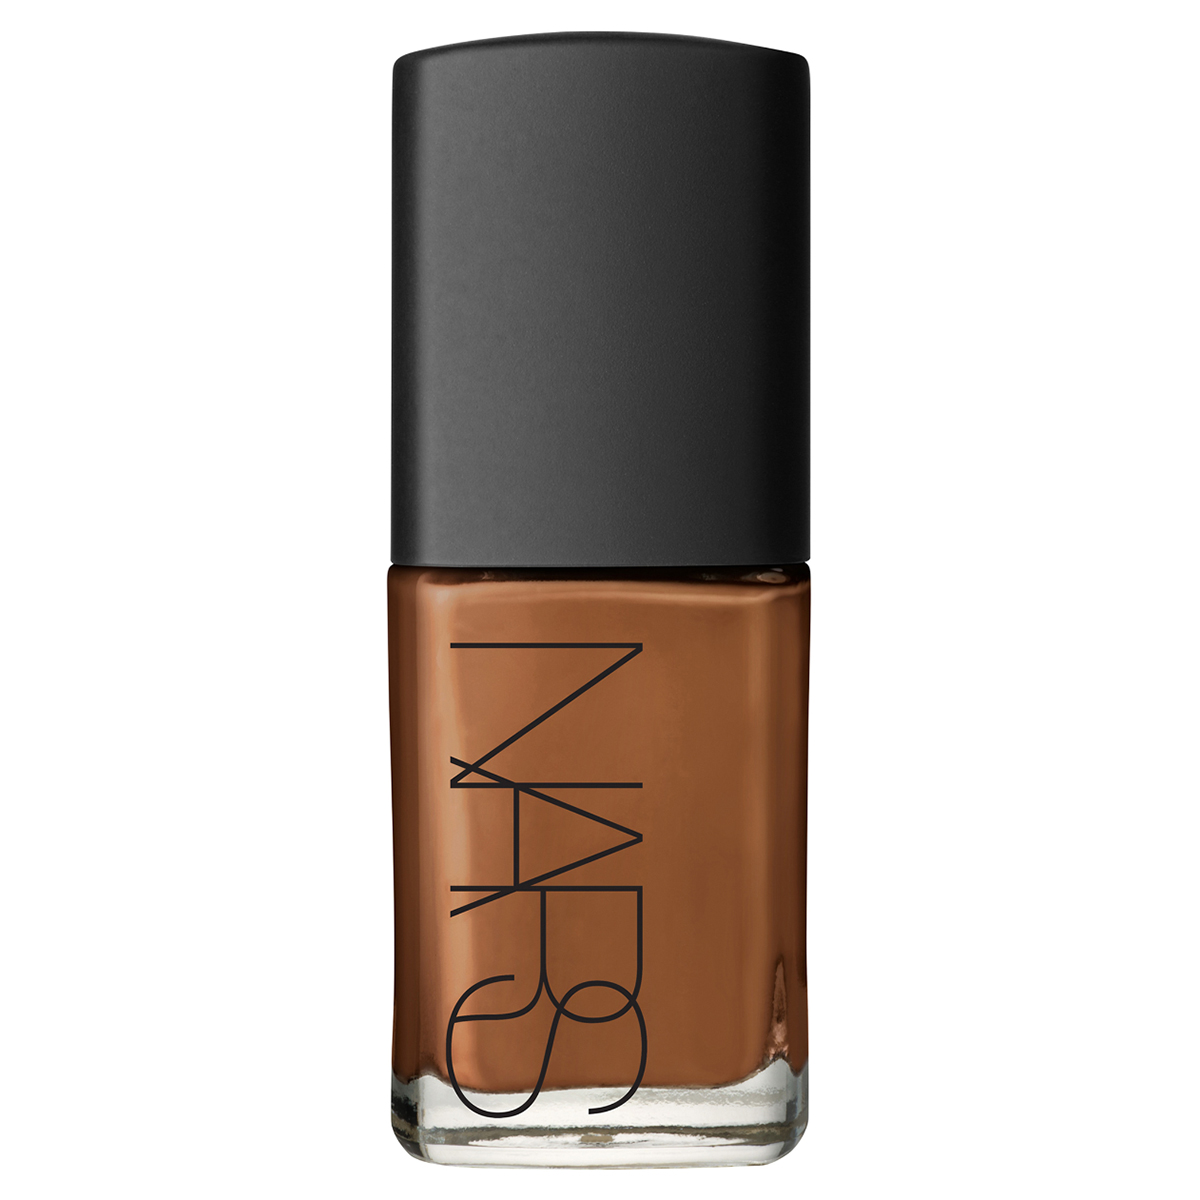 Best foundations for mature skin: Nars Sheer Glow Foundation